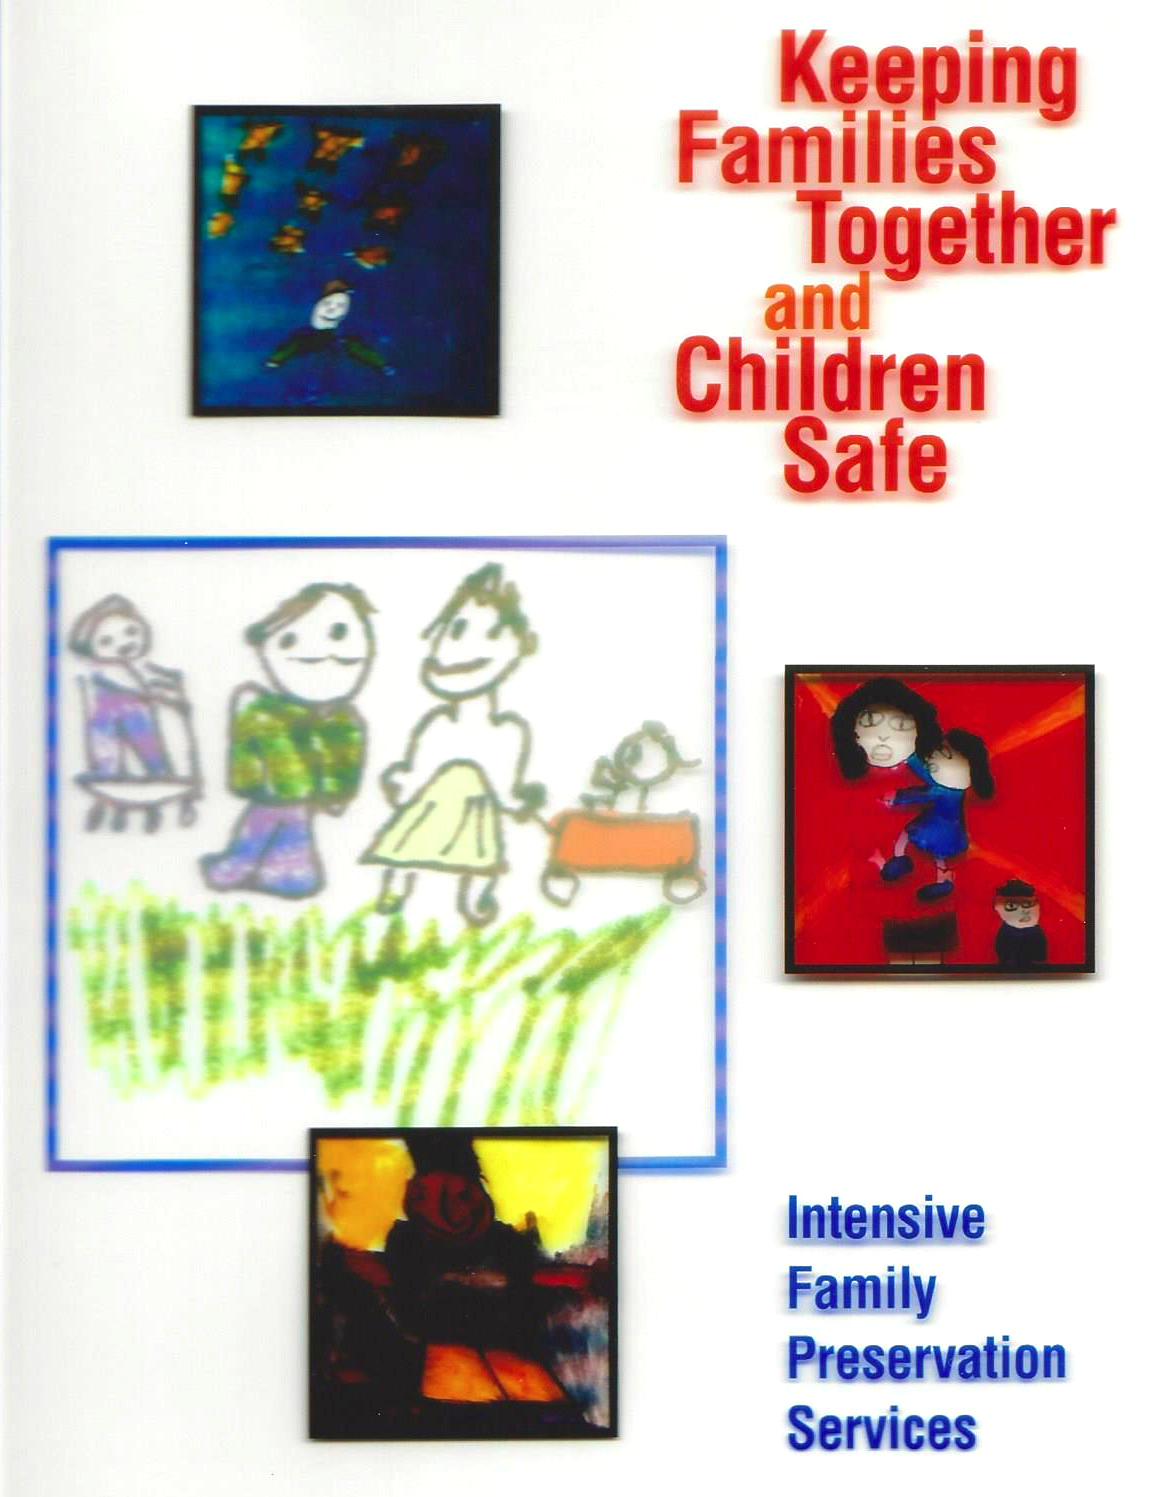 IFPS - Keeping Families Together and Children Safe